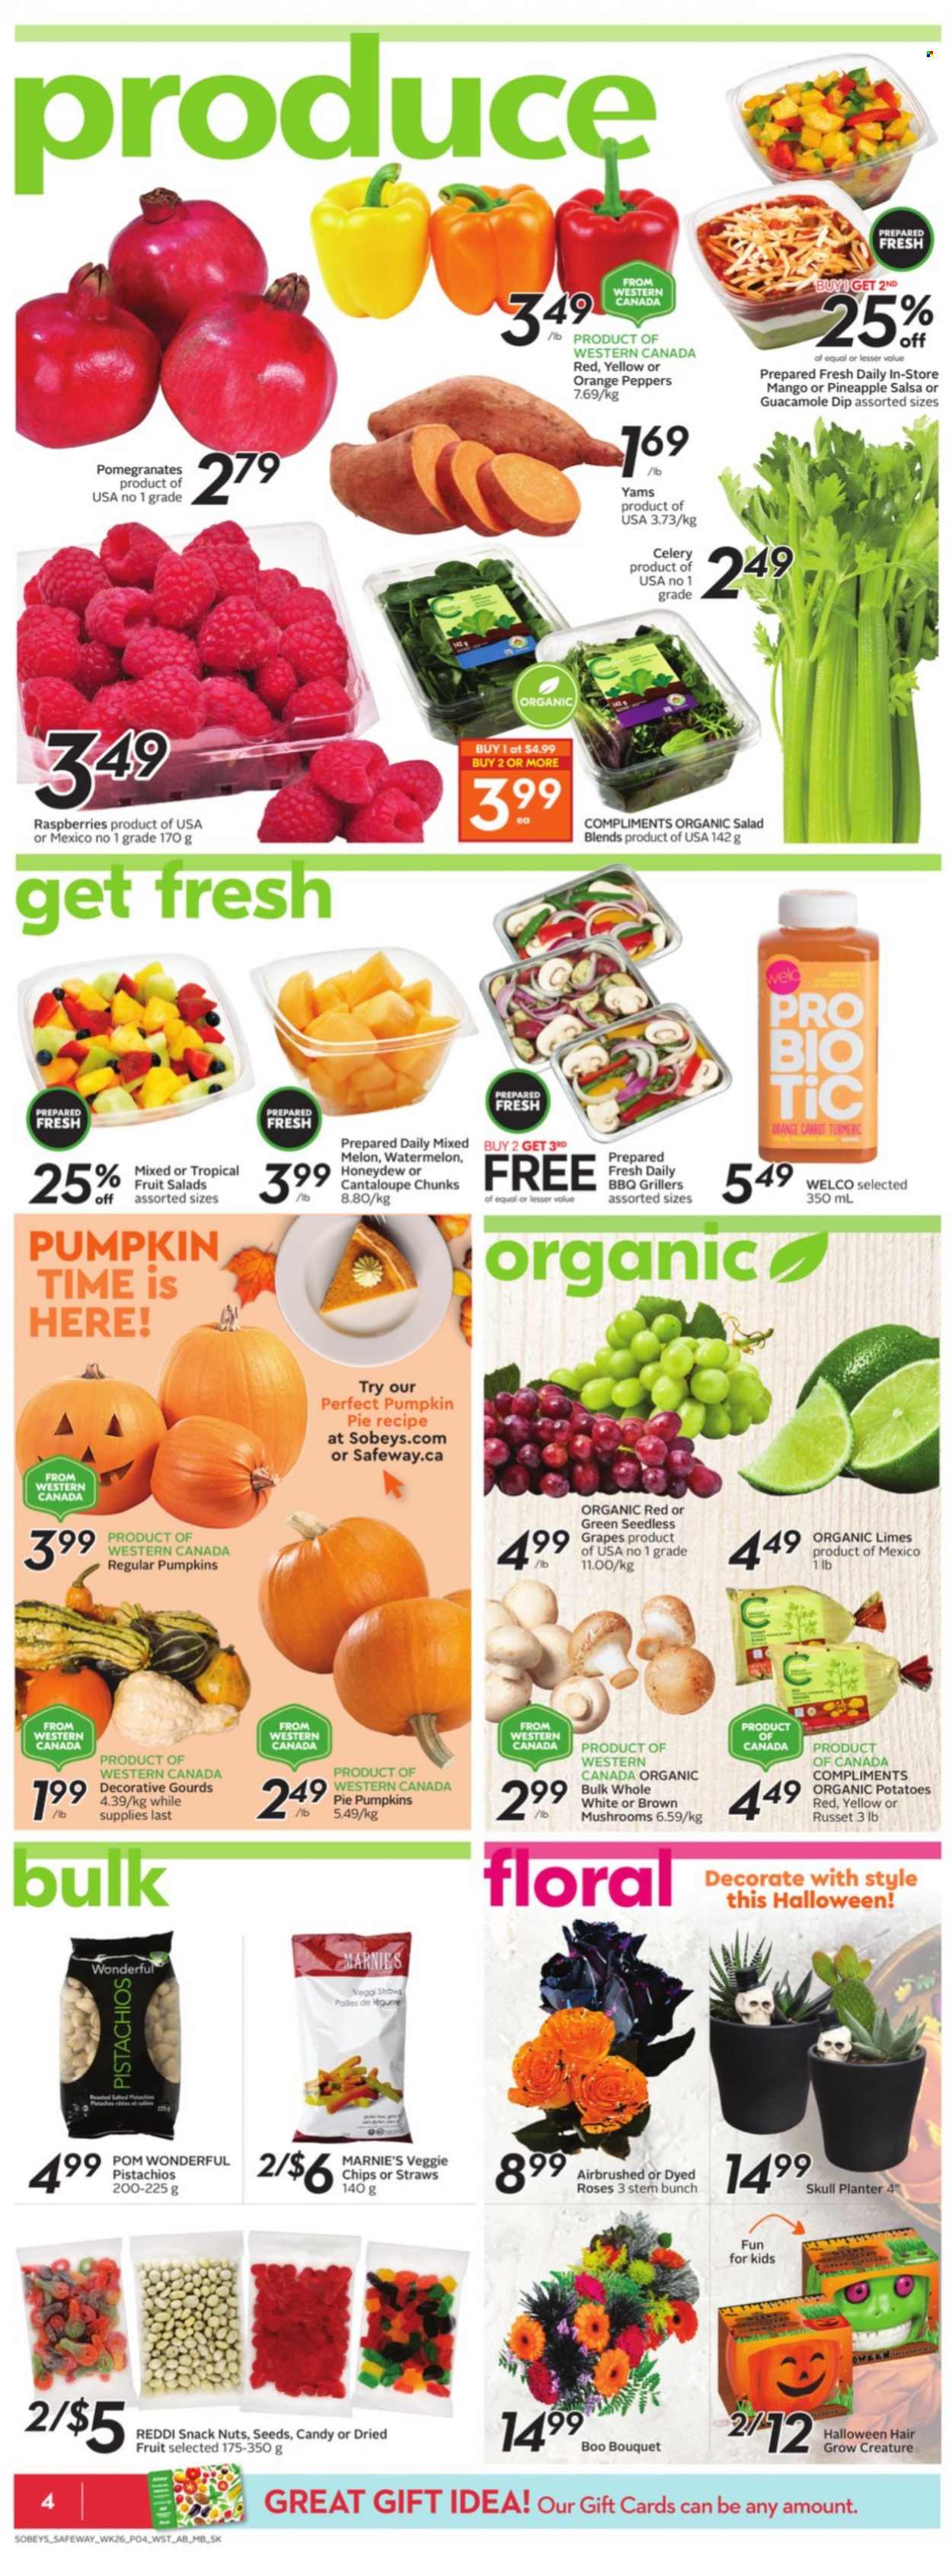 thumbnail - Safeway Flyer - October 21, 2021 - October 27, 2021 - Sales products - russet potatoes, potatoes, grapes, limes, seedless grapes, watermelon, honeydew, melons, pomegranate, guacamole, snack, turmeric, salsa, dried fruit, pistachios, bouquet, rose, chips, oranges. Page 4.